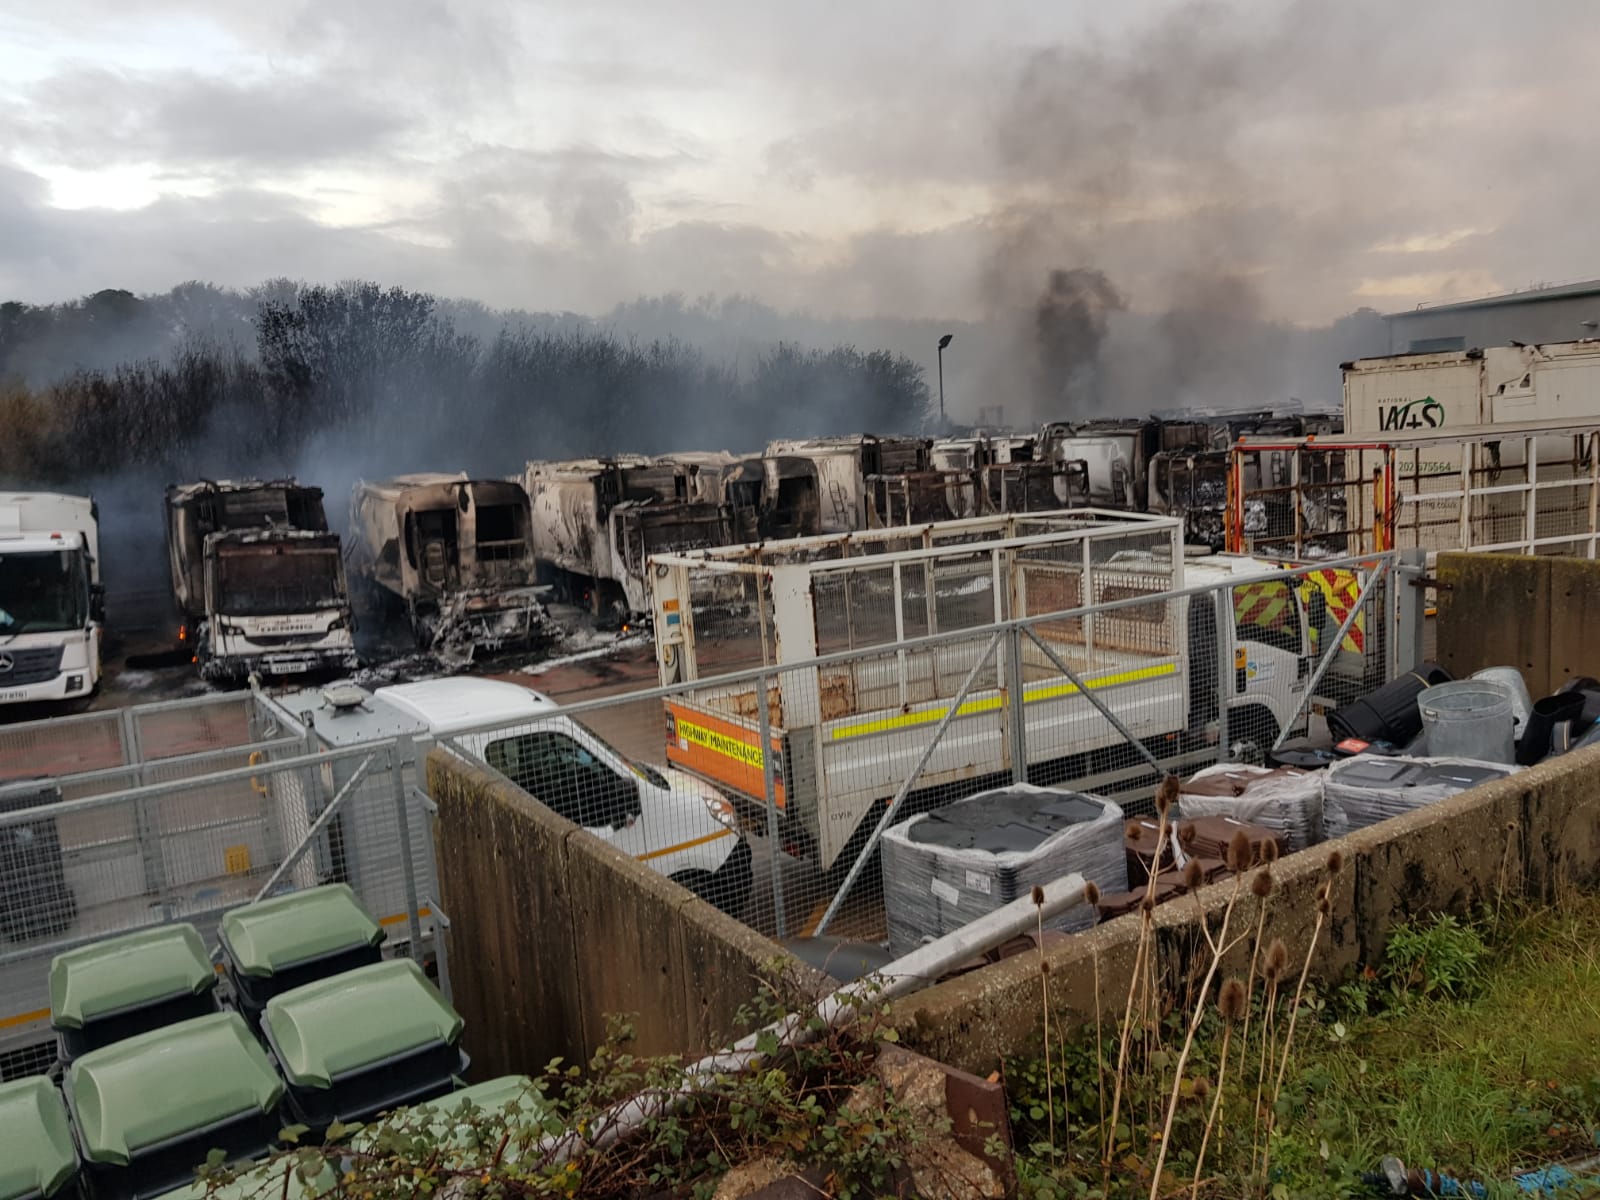 Shot of Chickerell depot and multiple vehicles destroyed by fire